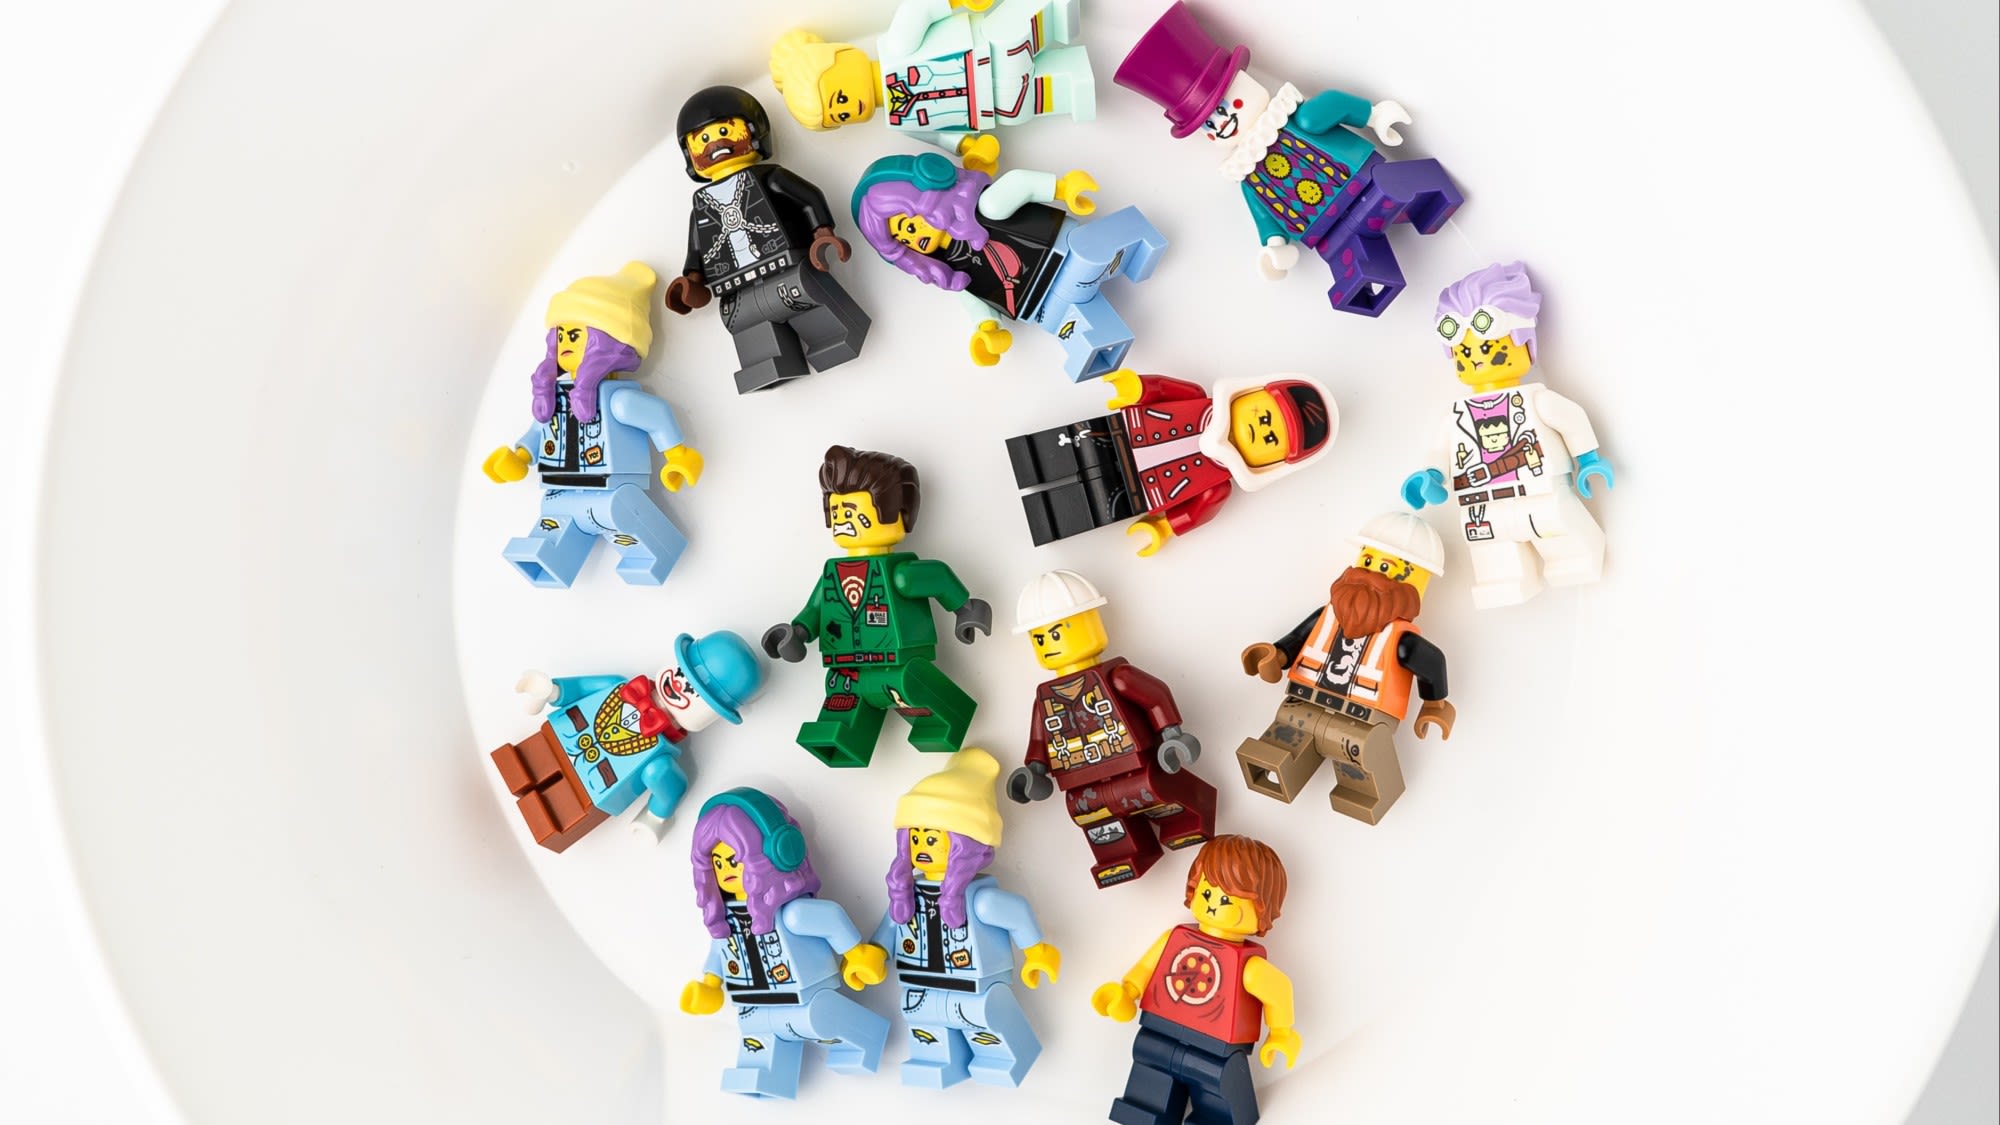 Photo of lego people in a circular shape